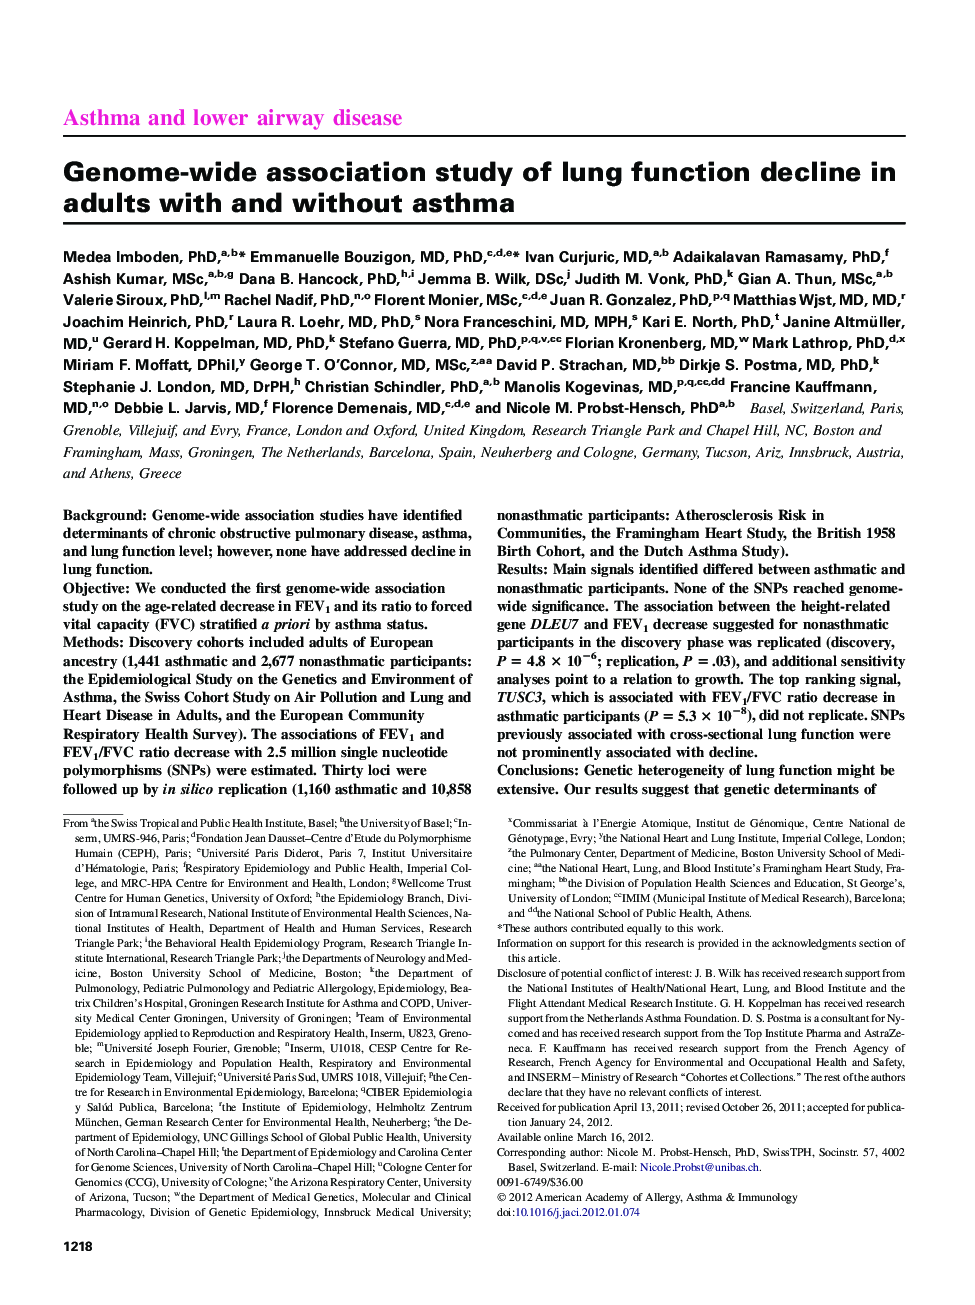 Genome-wide association study of lung function decline in adults with and without asthma 